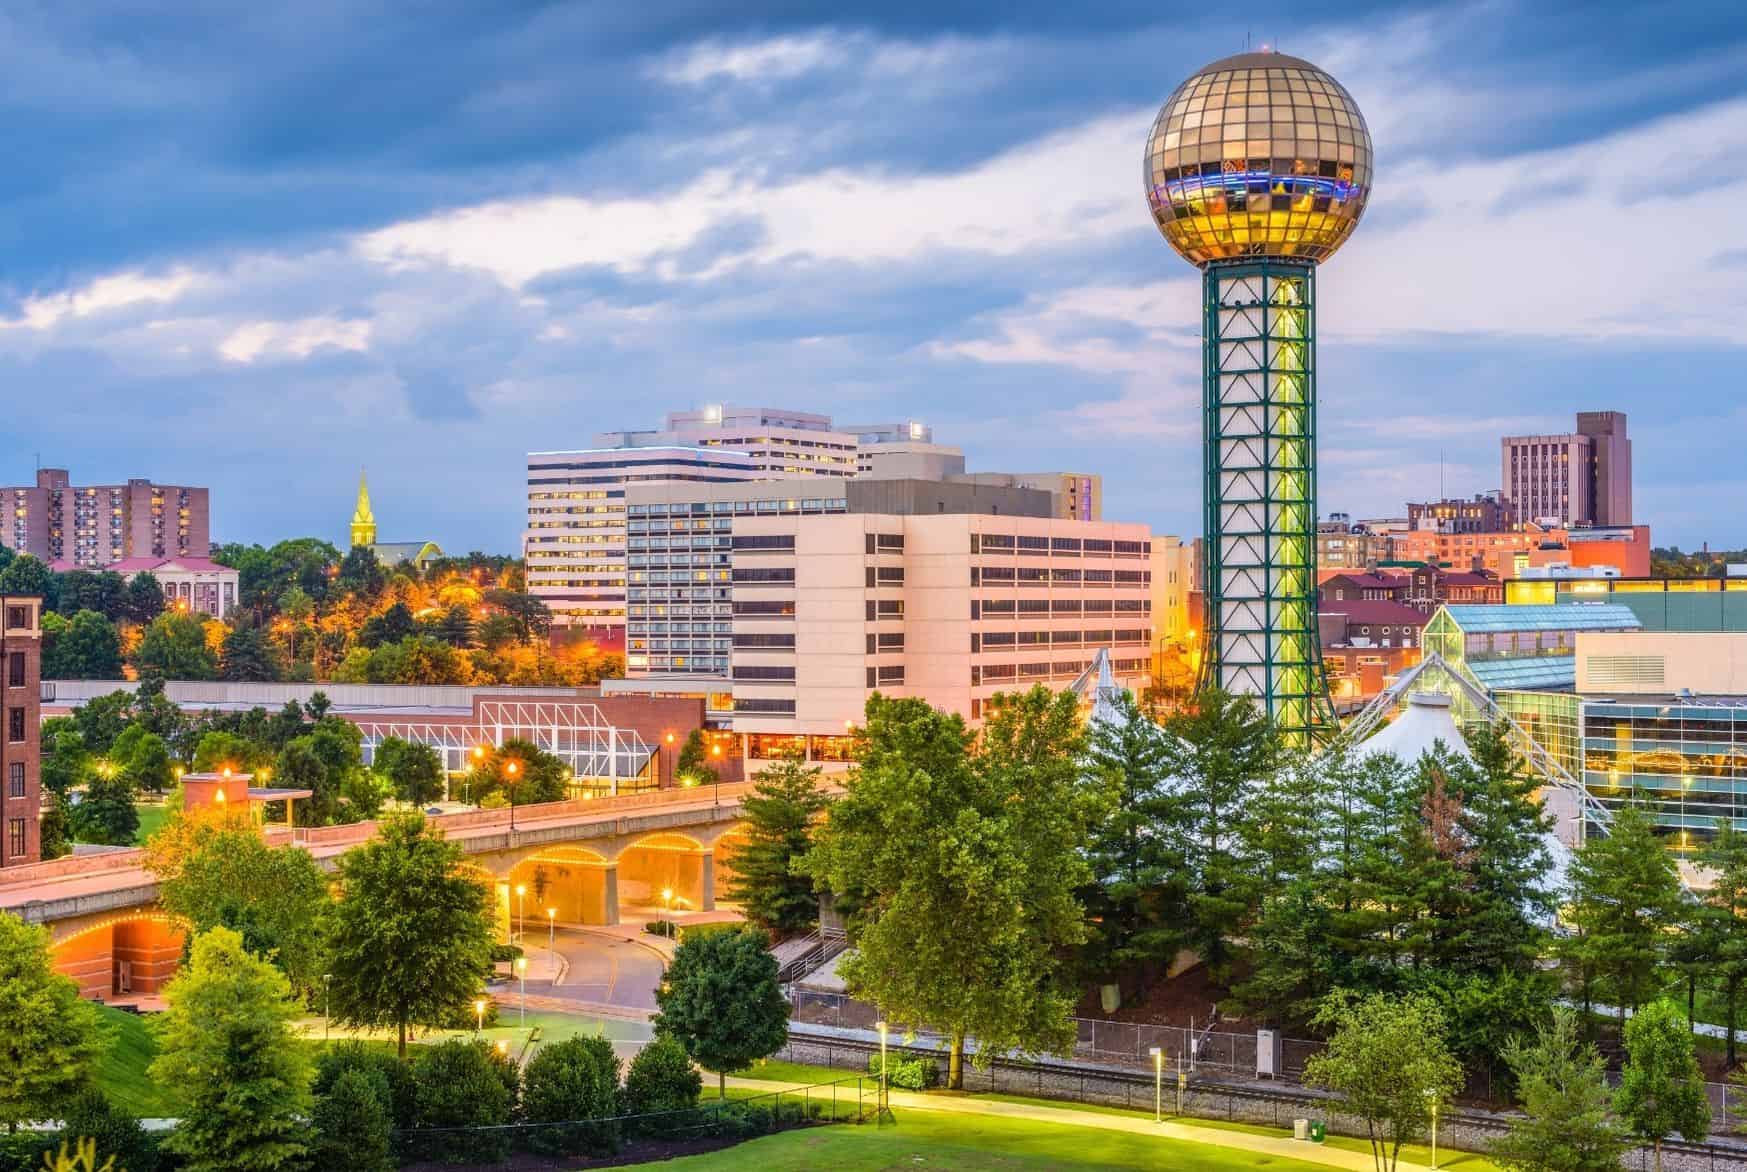 15 Best Things to Do in Knoxville (TN) - The Crazy Tourist